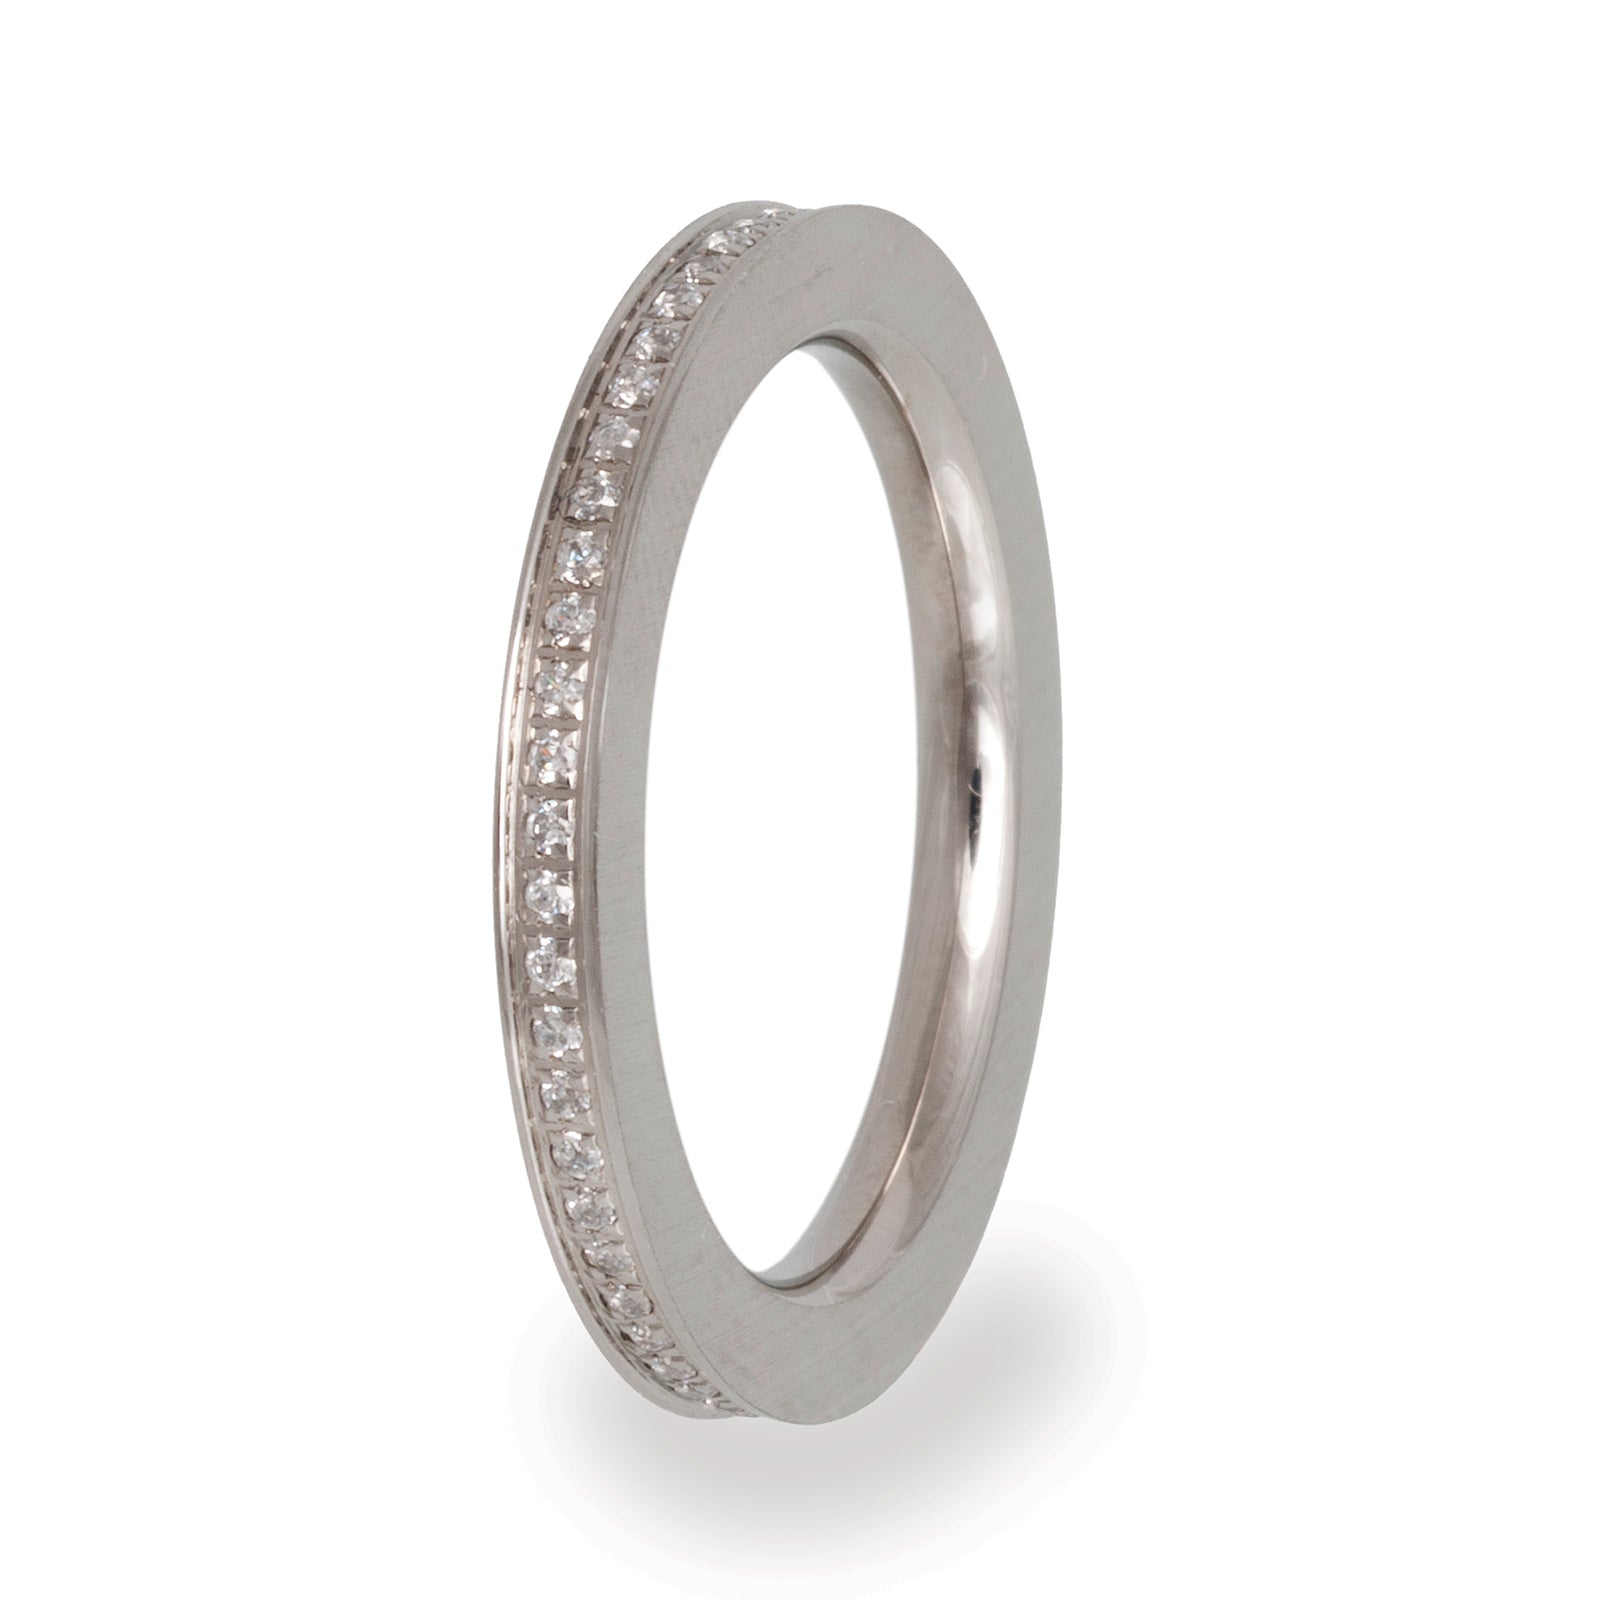 VR55 Stainless Steel Wedding Band